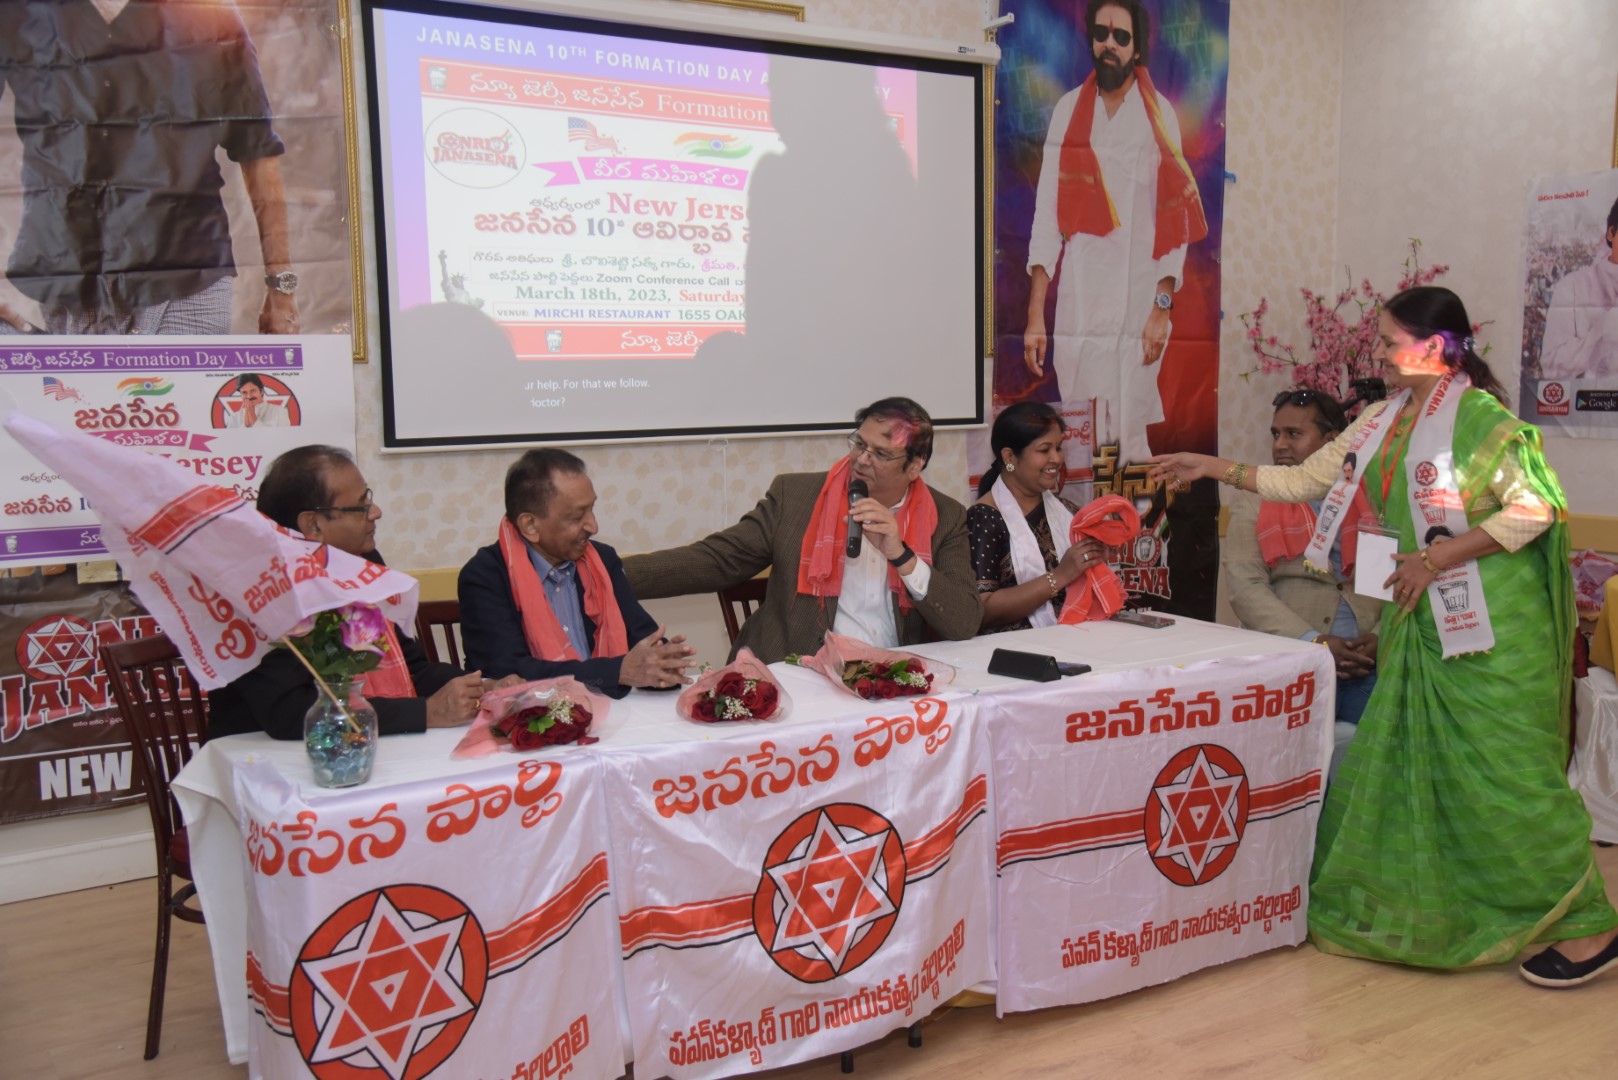 Janasena 10th Formation day in Edison New Jersey Photos ( Photos by Dr. Shiva Kumar Anand )